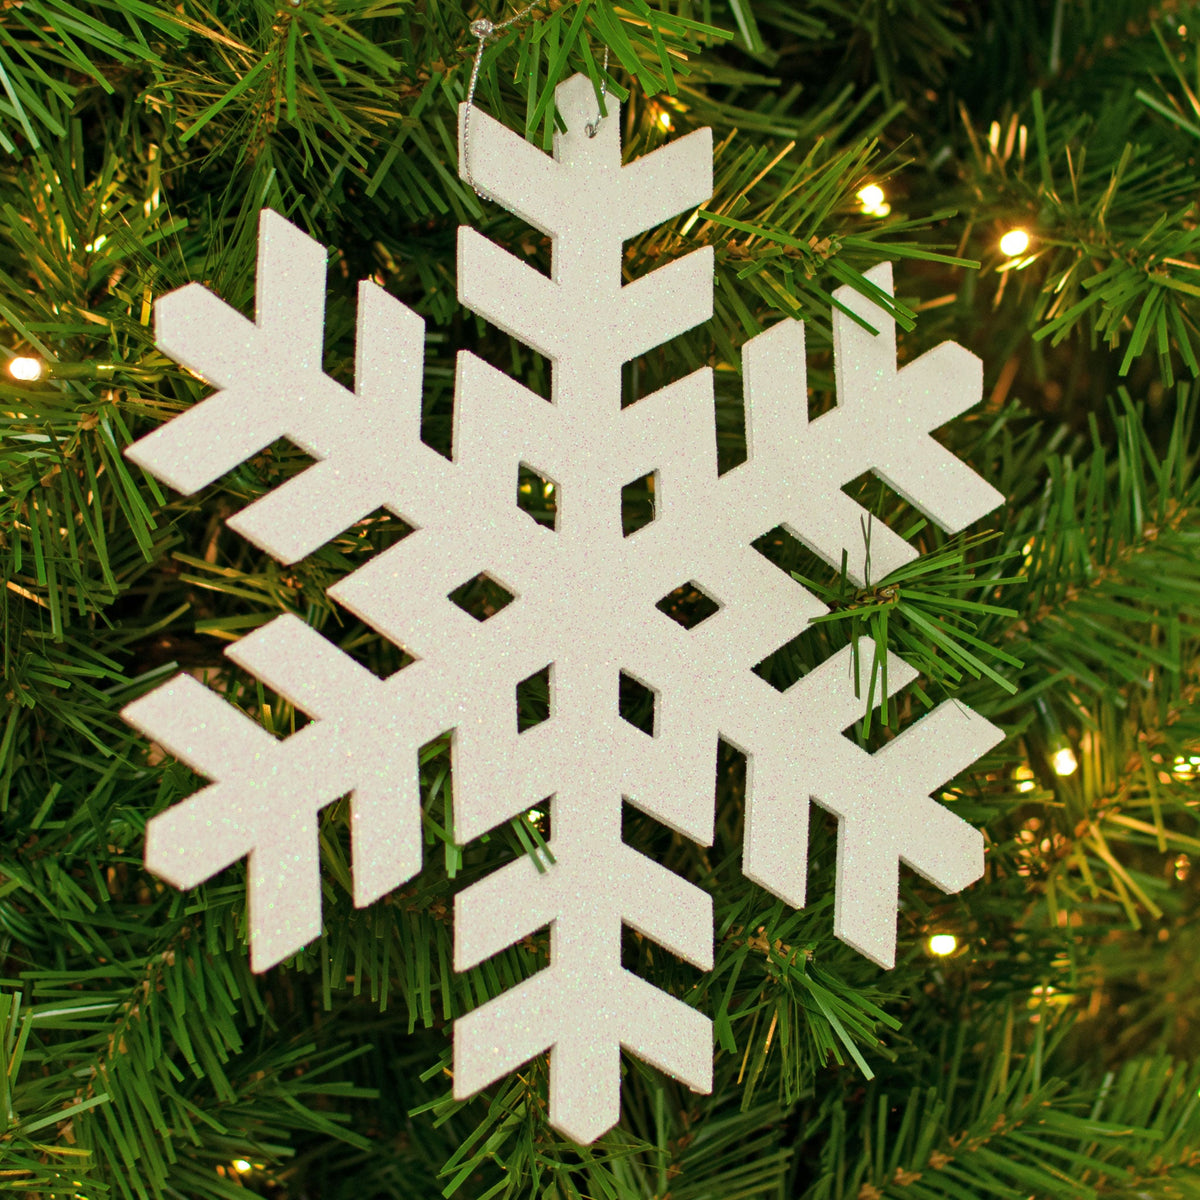 SnowSparkle Acrylic Snowflakes For Christmas Tree Glitter Winter Ornaments,  Ideal For Indoor/Outdoor Décor. From Mozifang, $8.59